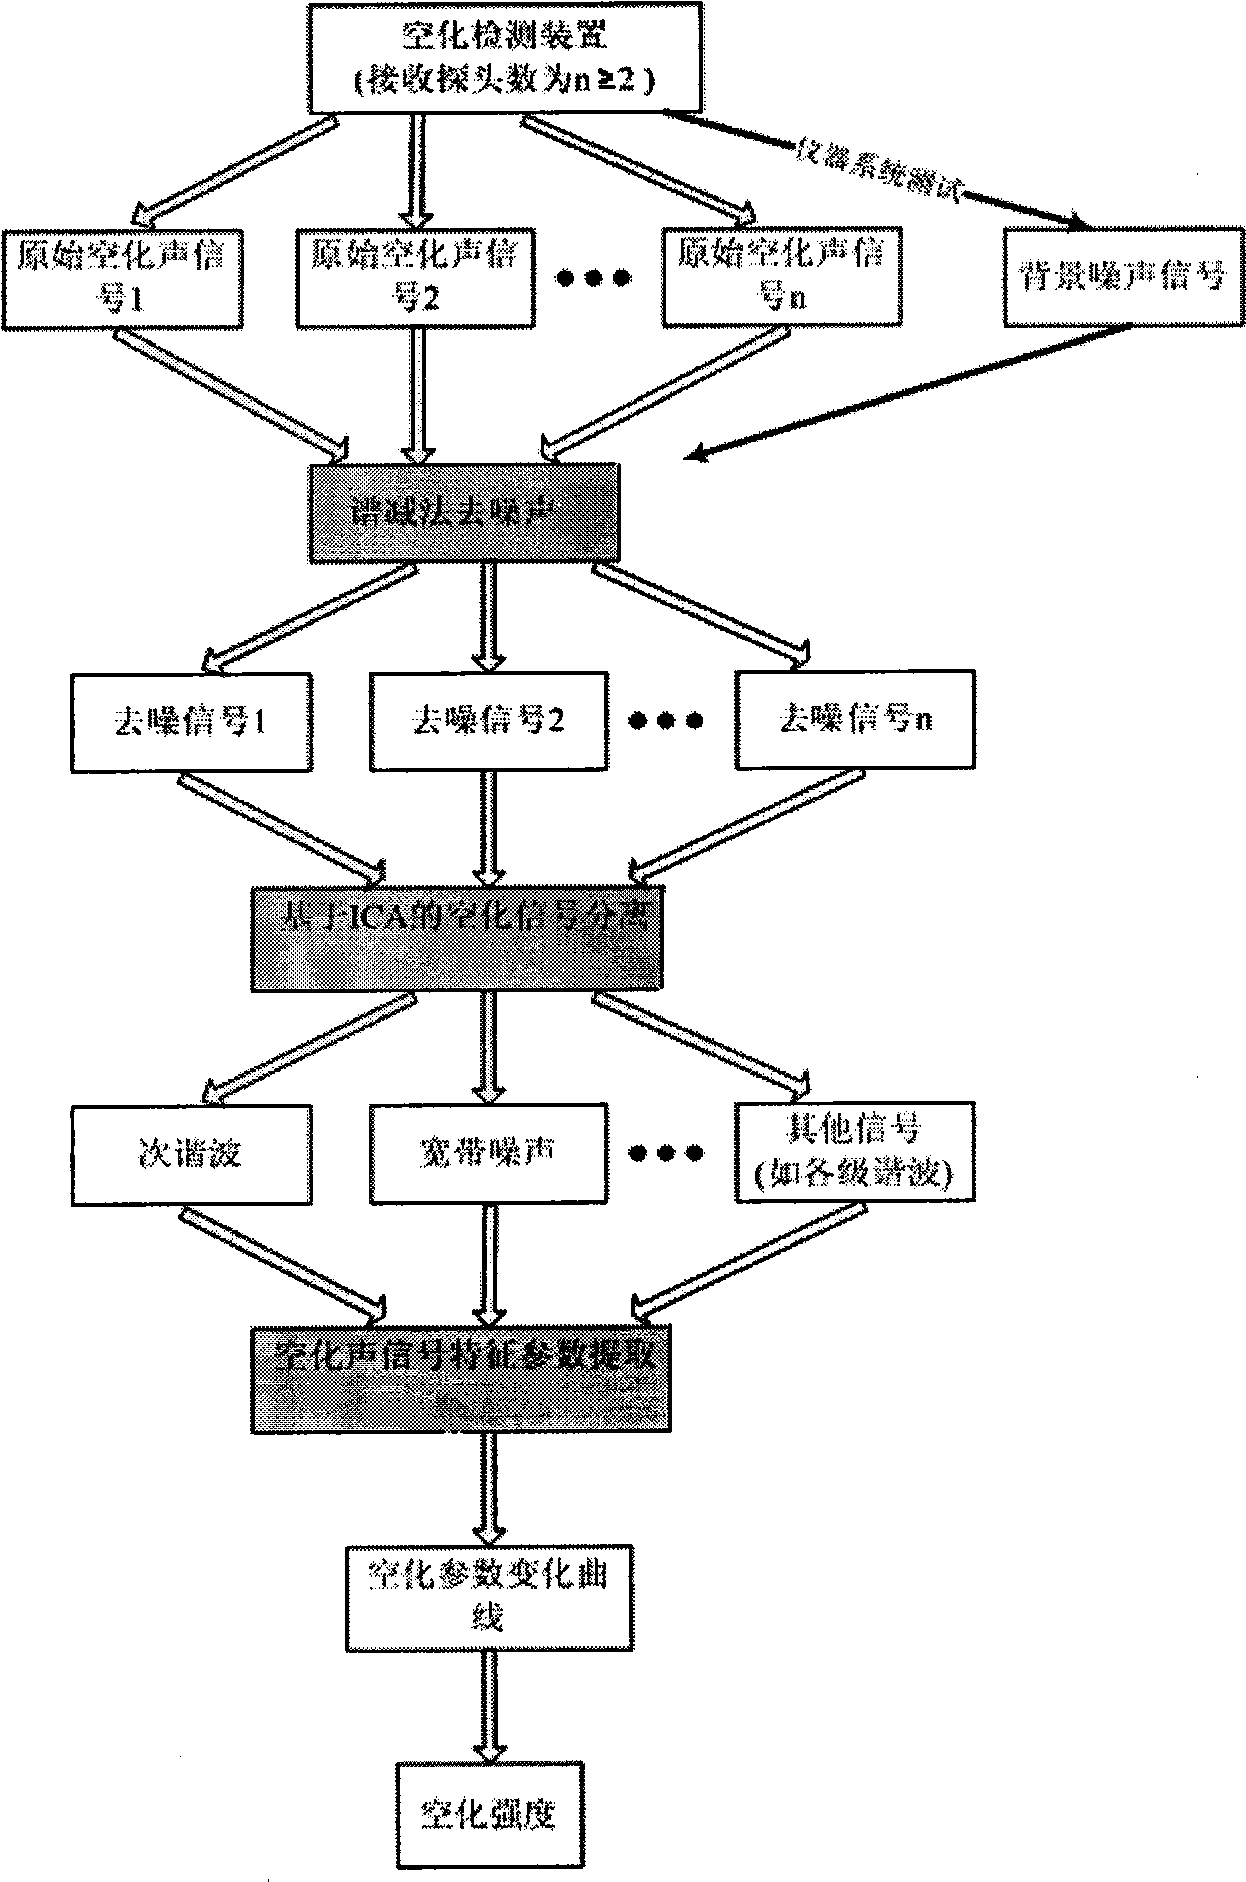 Real-time extracting device and detection method for focused ultrasonic cavitation and microbubbles thereof